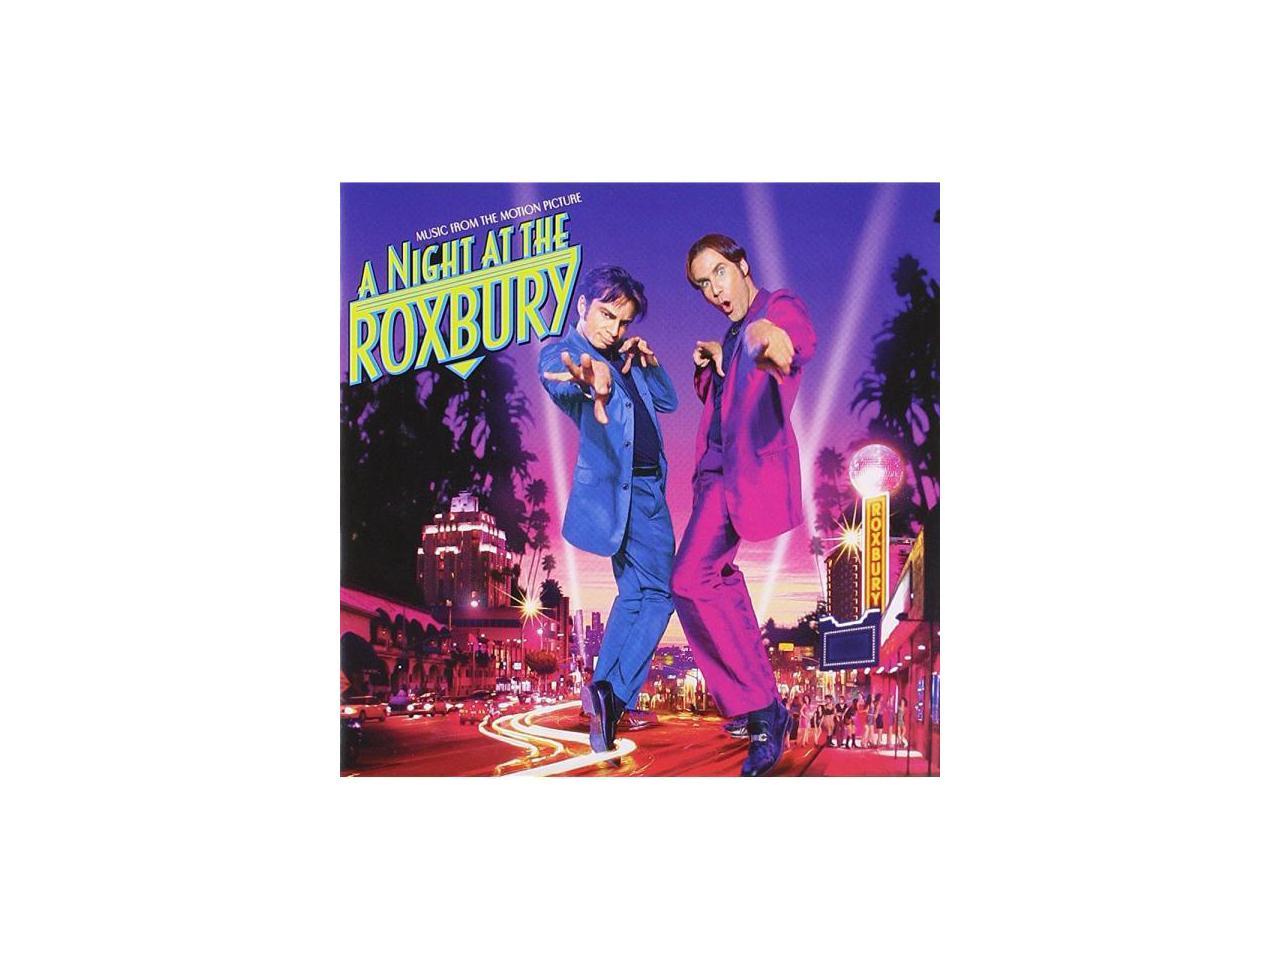 songs from night at the roxbury